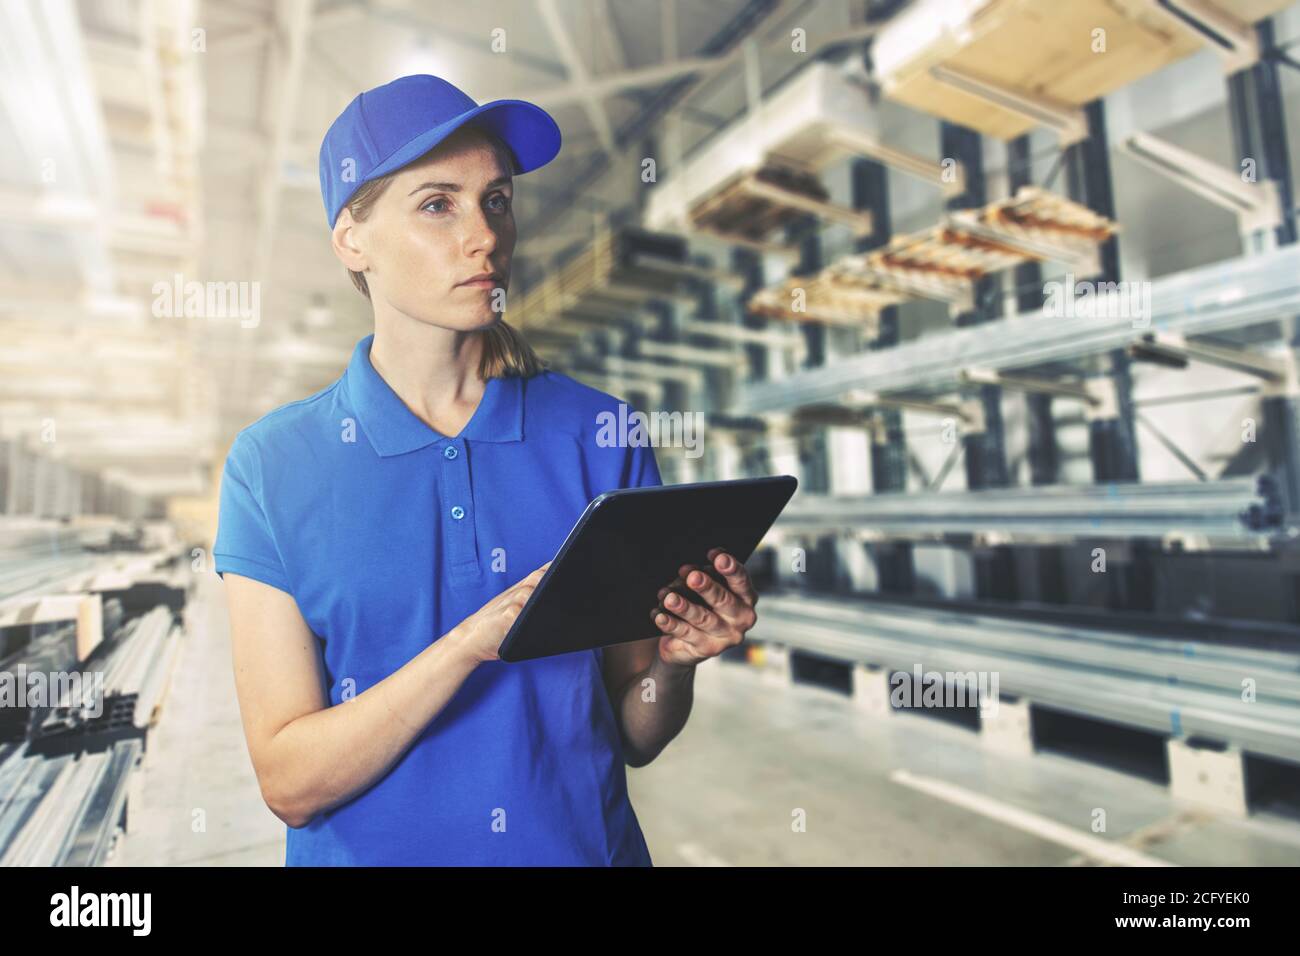 stock management - young female warehouse employee with digital tablet at construction material store Stock Photo